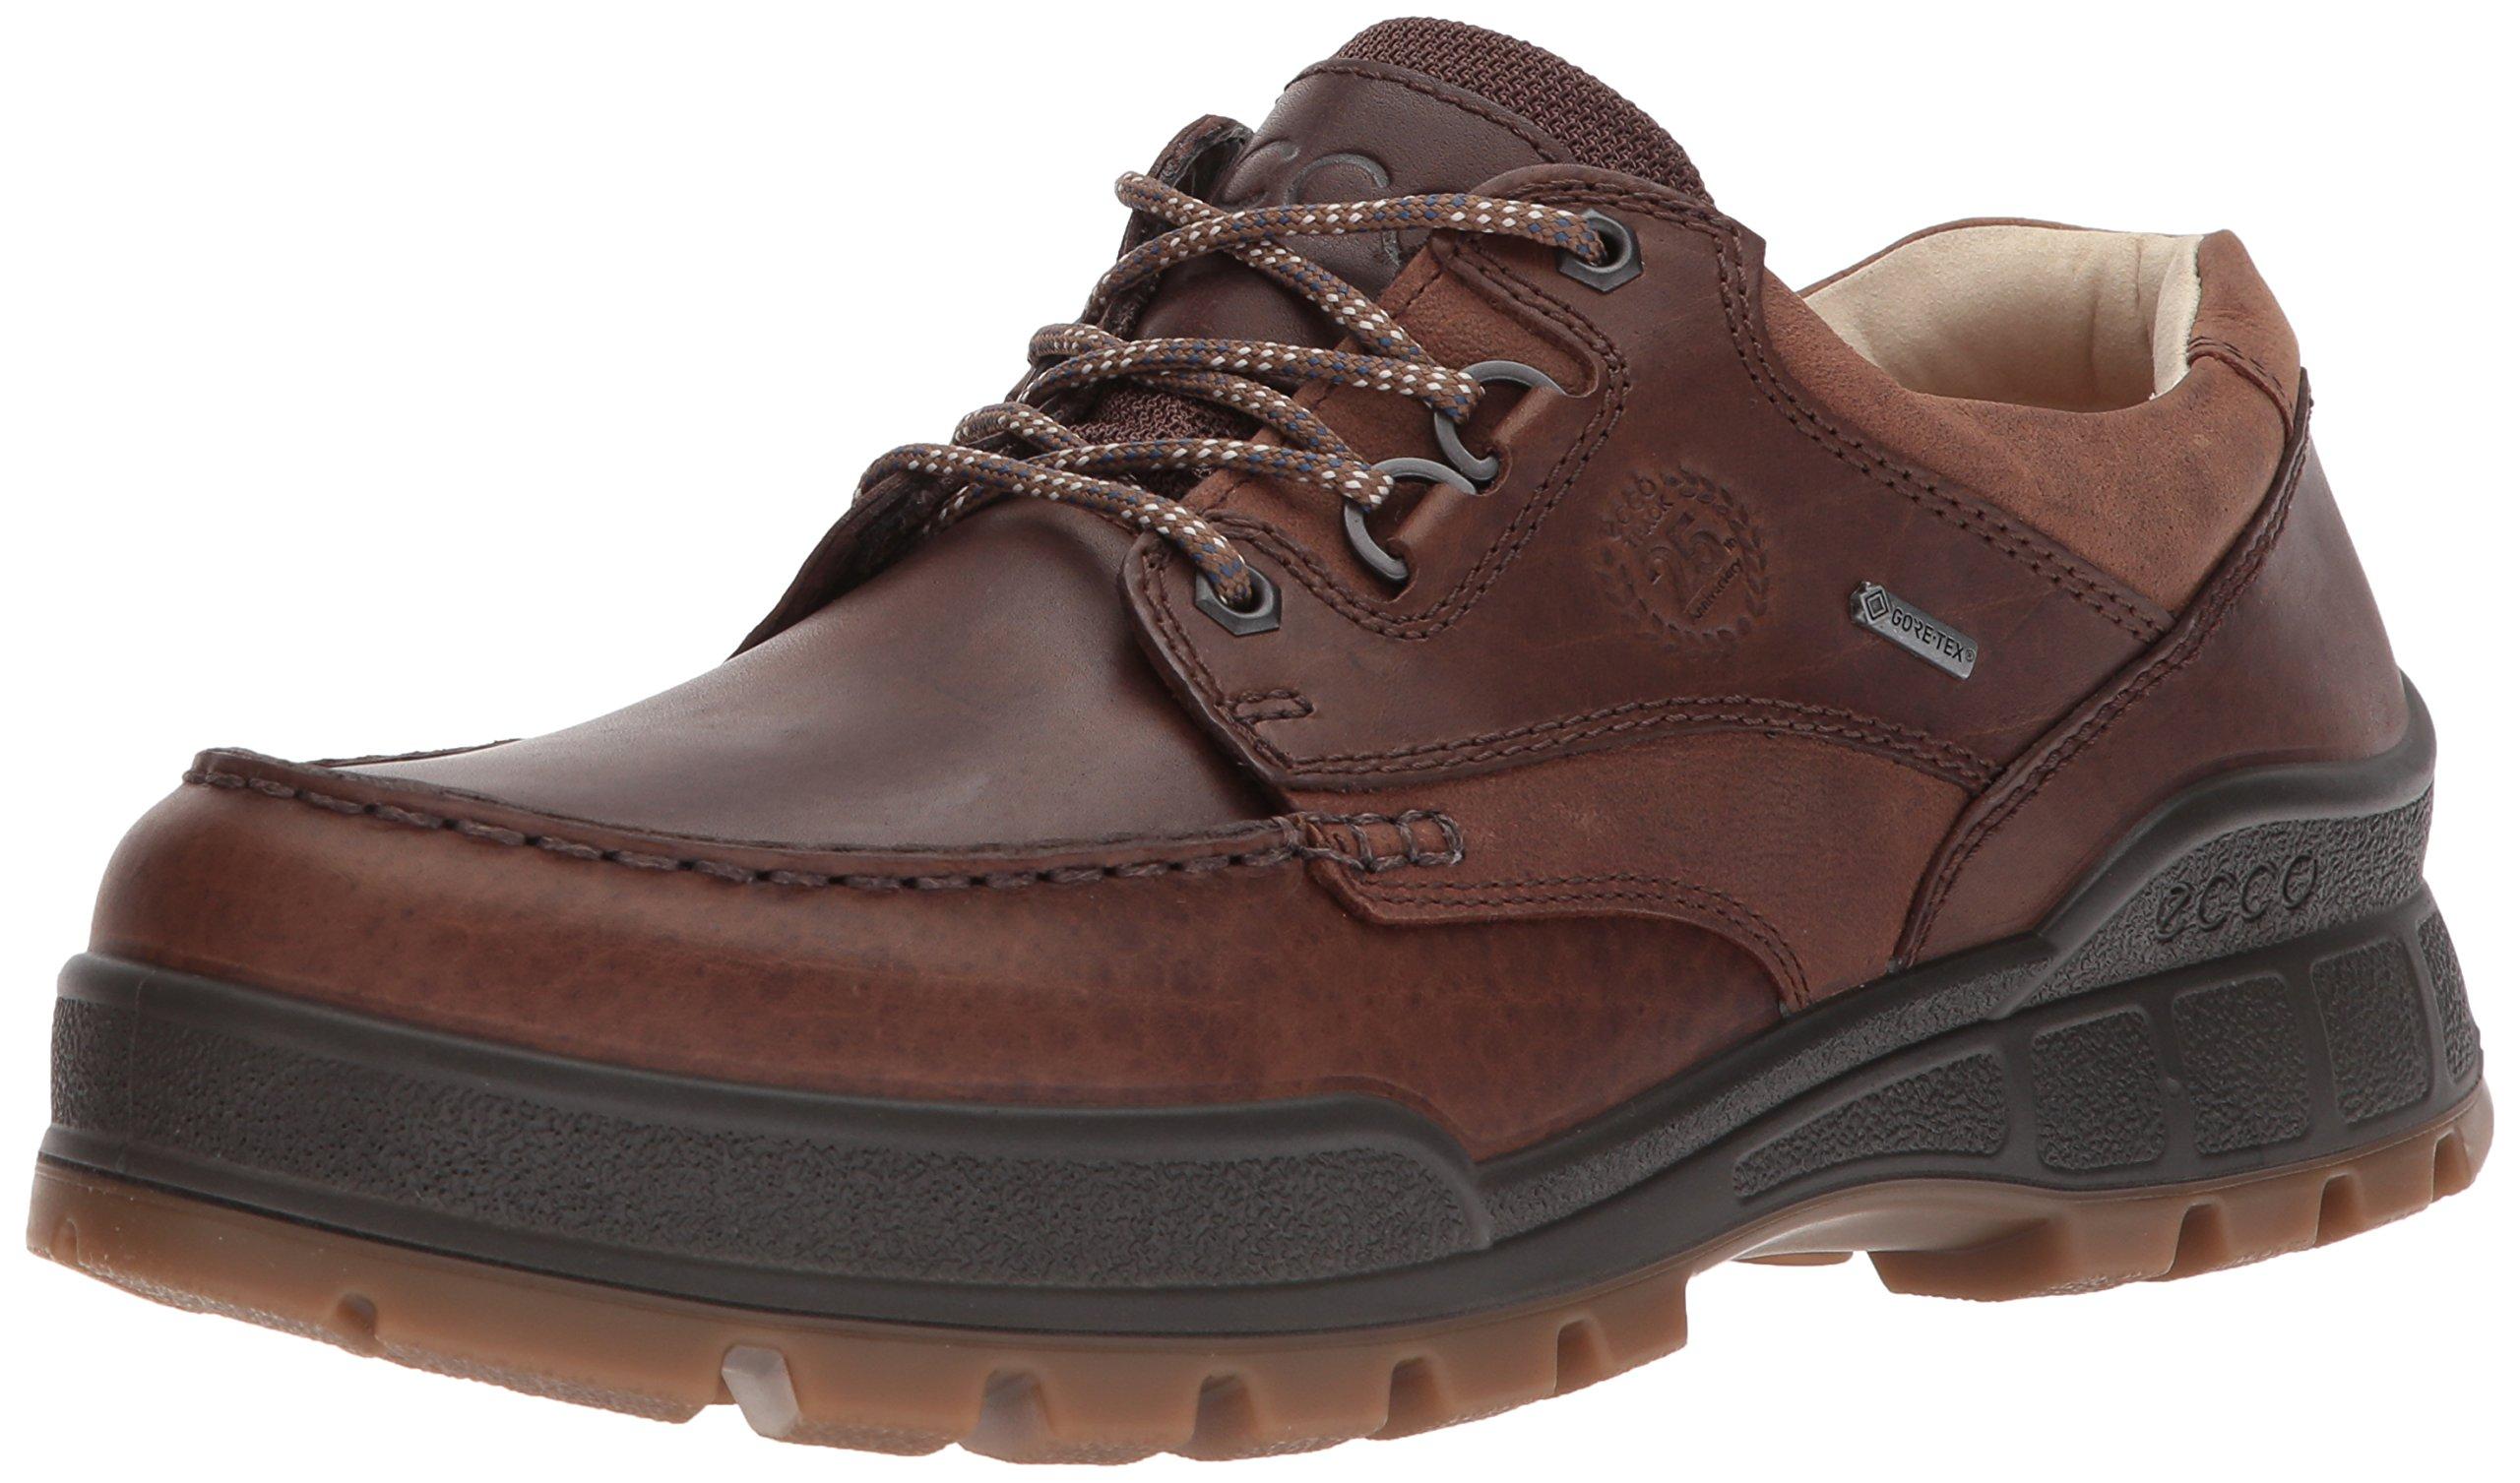 Ecco Leather Track 25 Shoe Oxford in Cocoa Brown/Camel (Brown) for Men -  Save 20% - Lyst